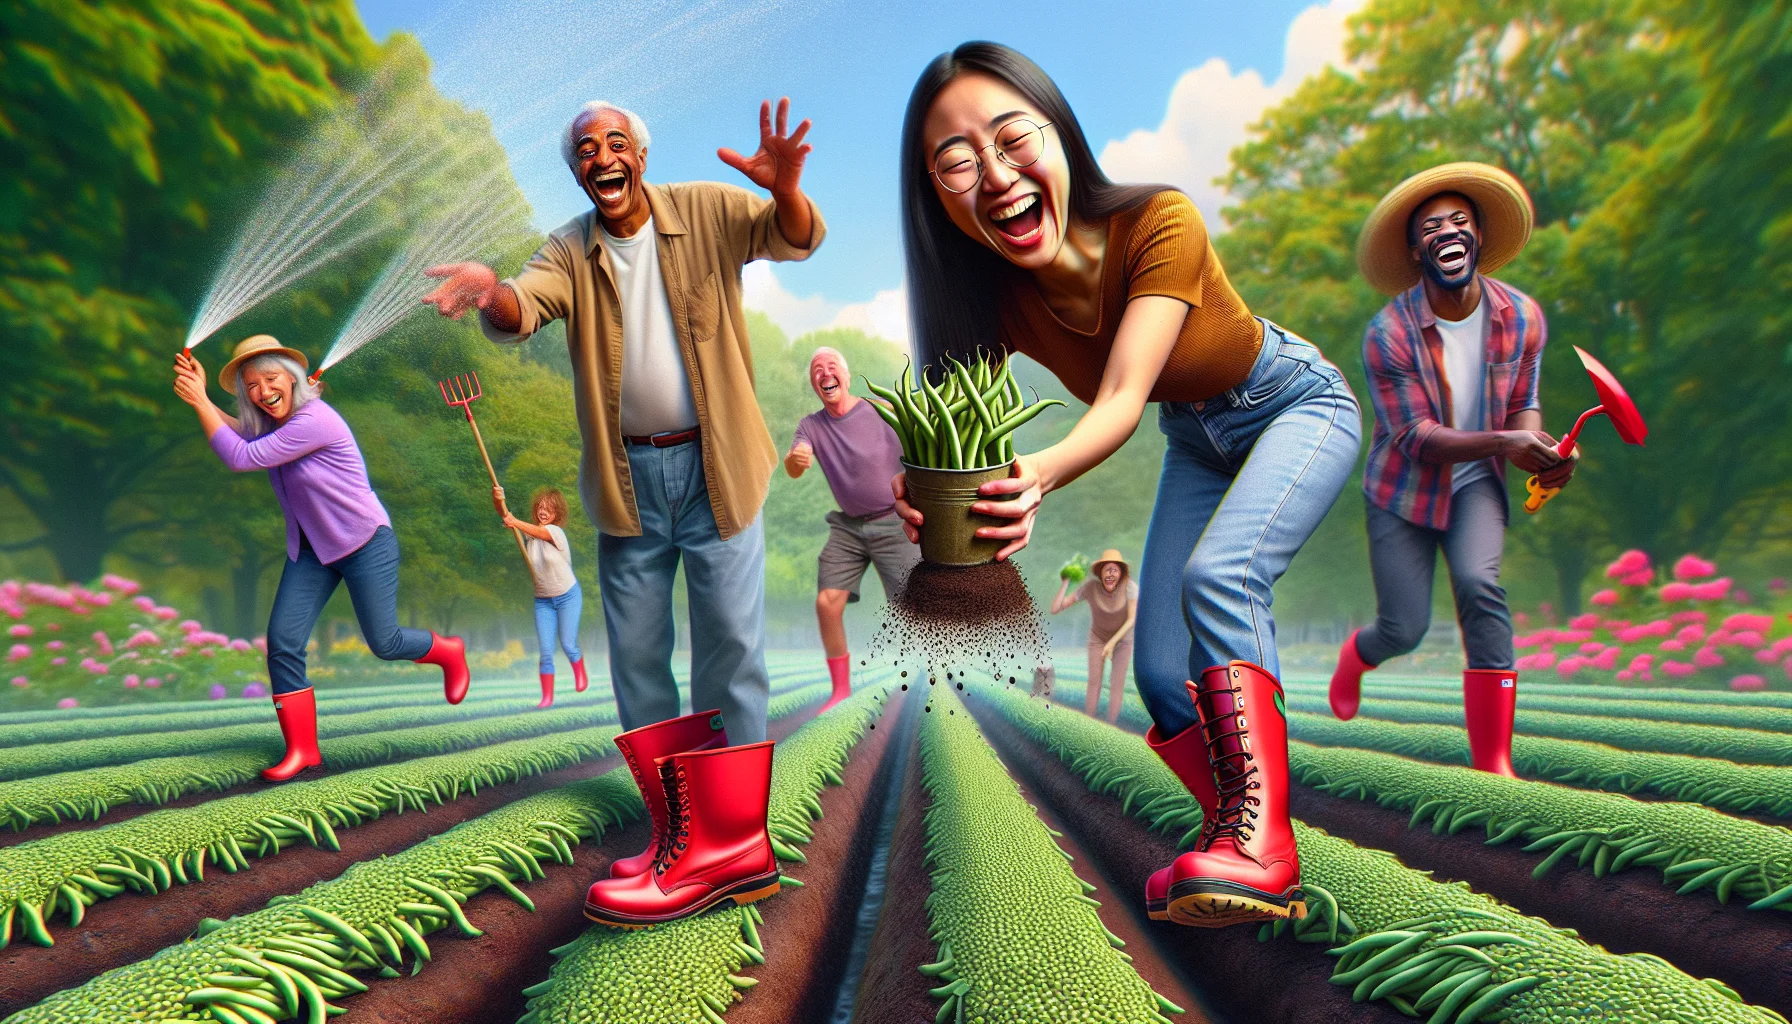 Imagine a park filled with jovial gardeners of different genders and descents. A young Asian woman playfully tosses bush bean seeds into a patch of soil, her eyes gleaming with joy. Behind her, a Hispanic man chuckles while trying to prevent a sprinkler from watering his red gardening boots. Closer to the foreground, a Black woman breaks into infectious laughter as she realizes she's planted a line of beans in a zigzag pattern. This image should be a vibrant, hyper-realistic depiction of the joy of gardening with a humorous twist.